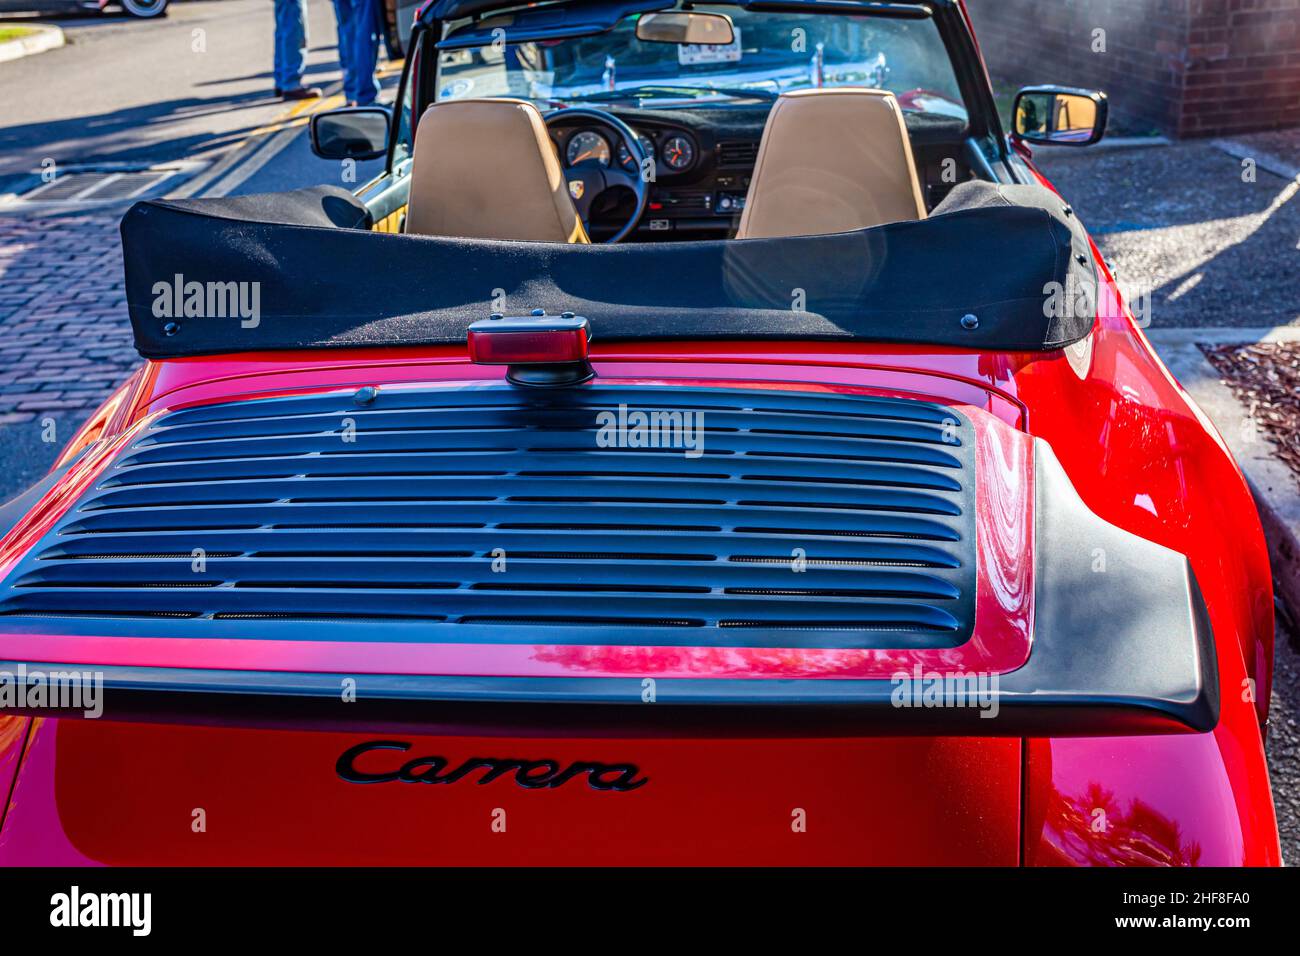 Fernandina Beach, FL - October 18, 2014: Wide angle low perspective rear view of a 1985 Porsche 911 Carrera Cabriolet at a classic car show in Fernand Stock Photo